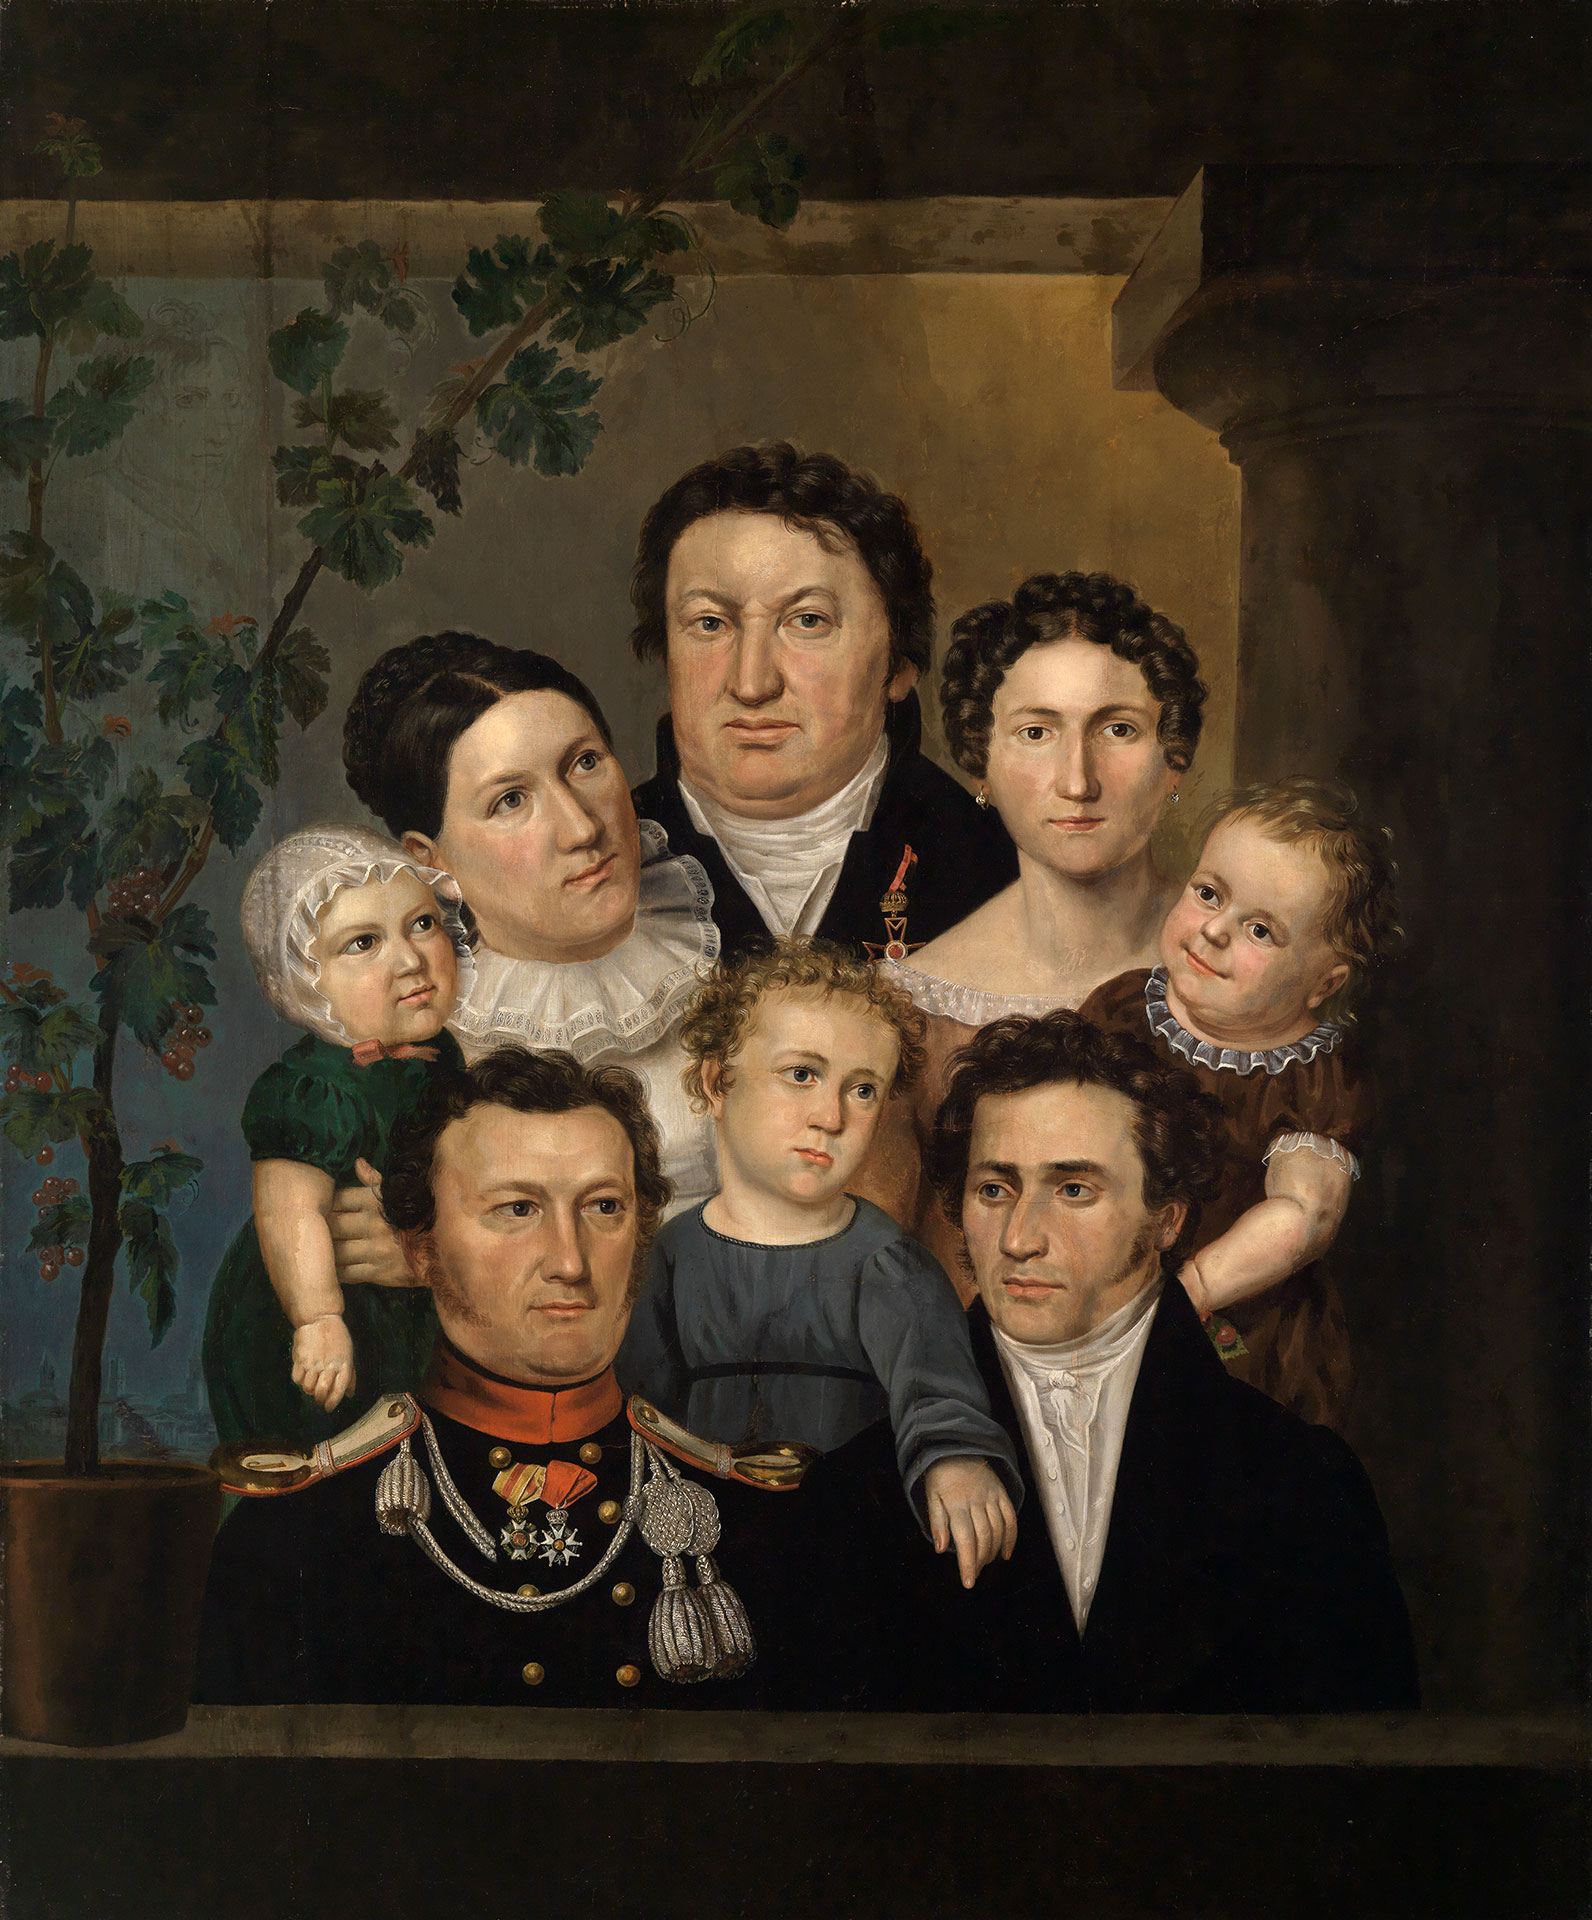 Illustration of the work of art "Weinbrenner and his family" by Feodor Ivanovich Kalmück ?, created in 1823. The illustration shows a crowded group of people. The work of art is located in the Staatliche Kunsthalle Karlsruhe.